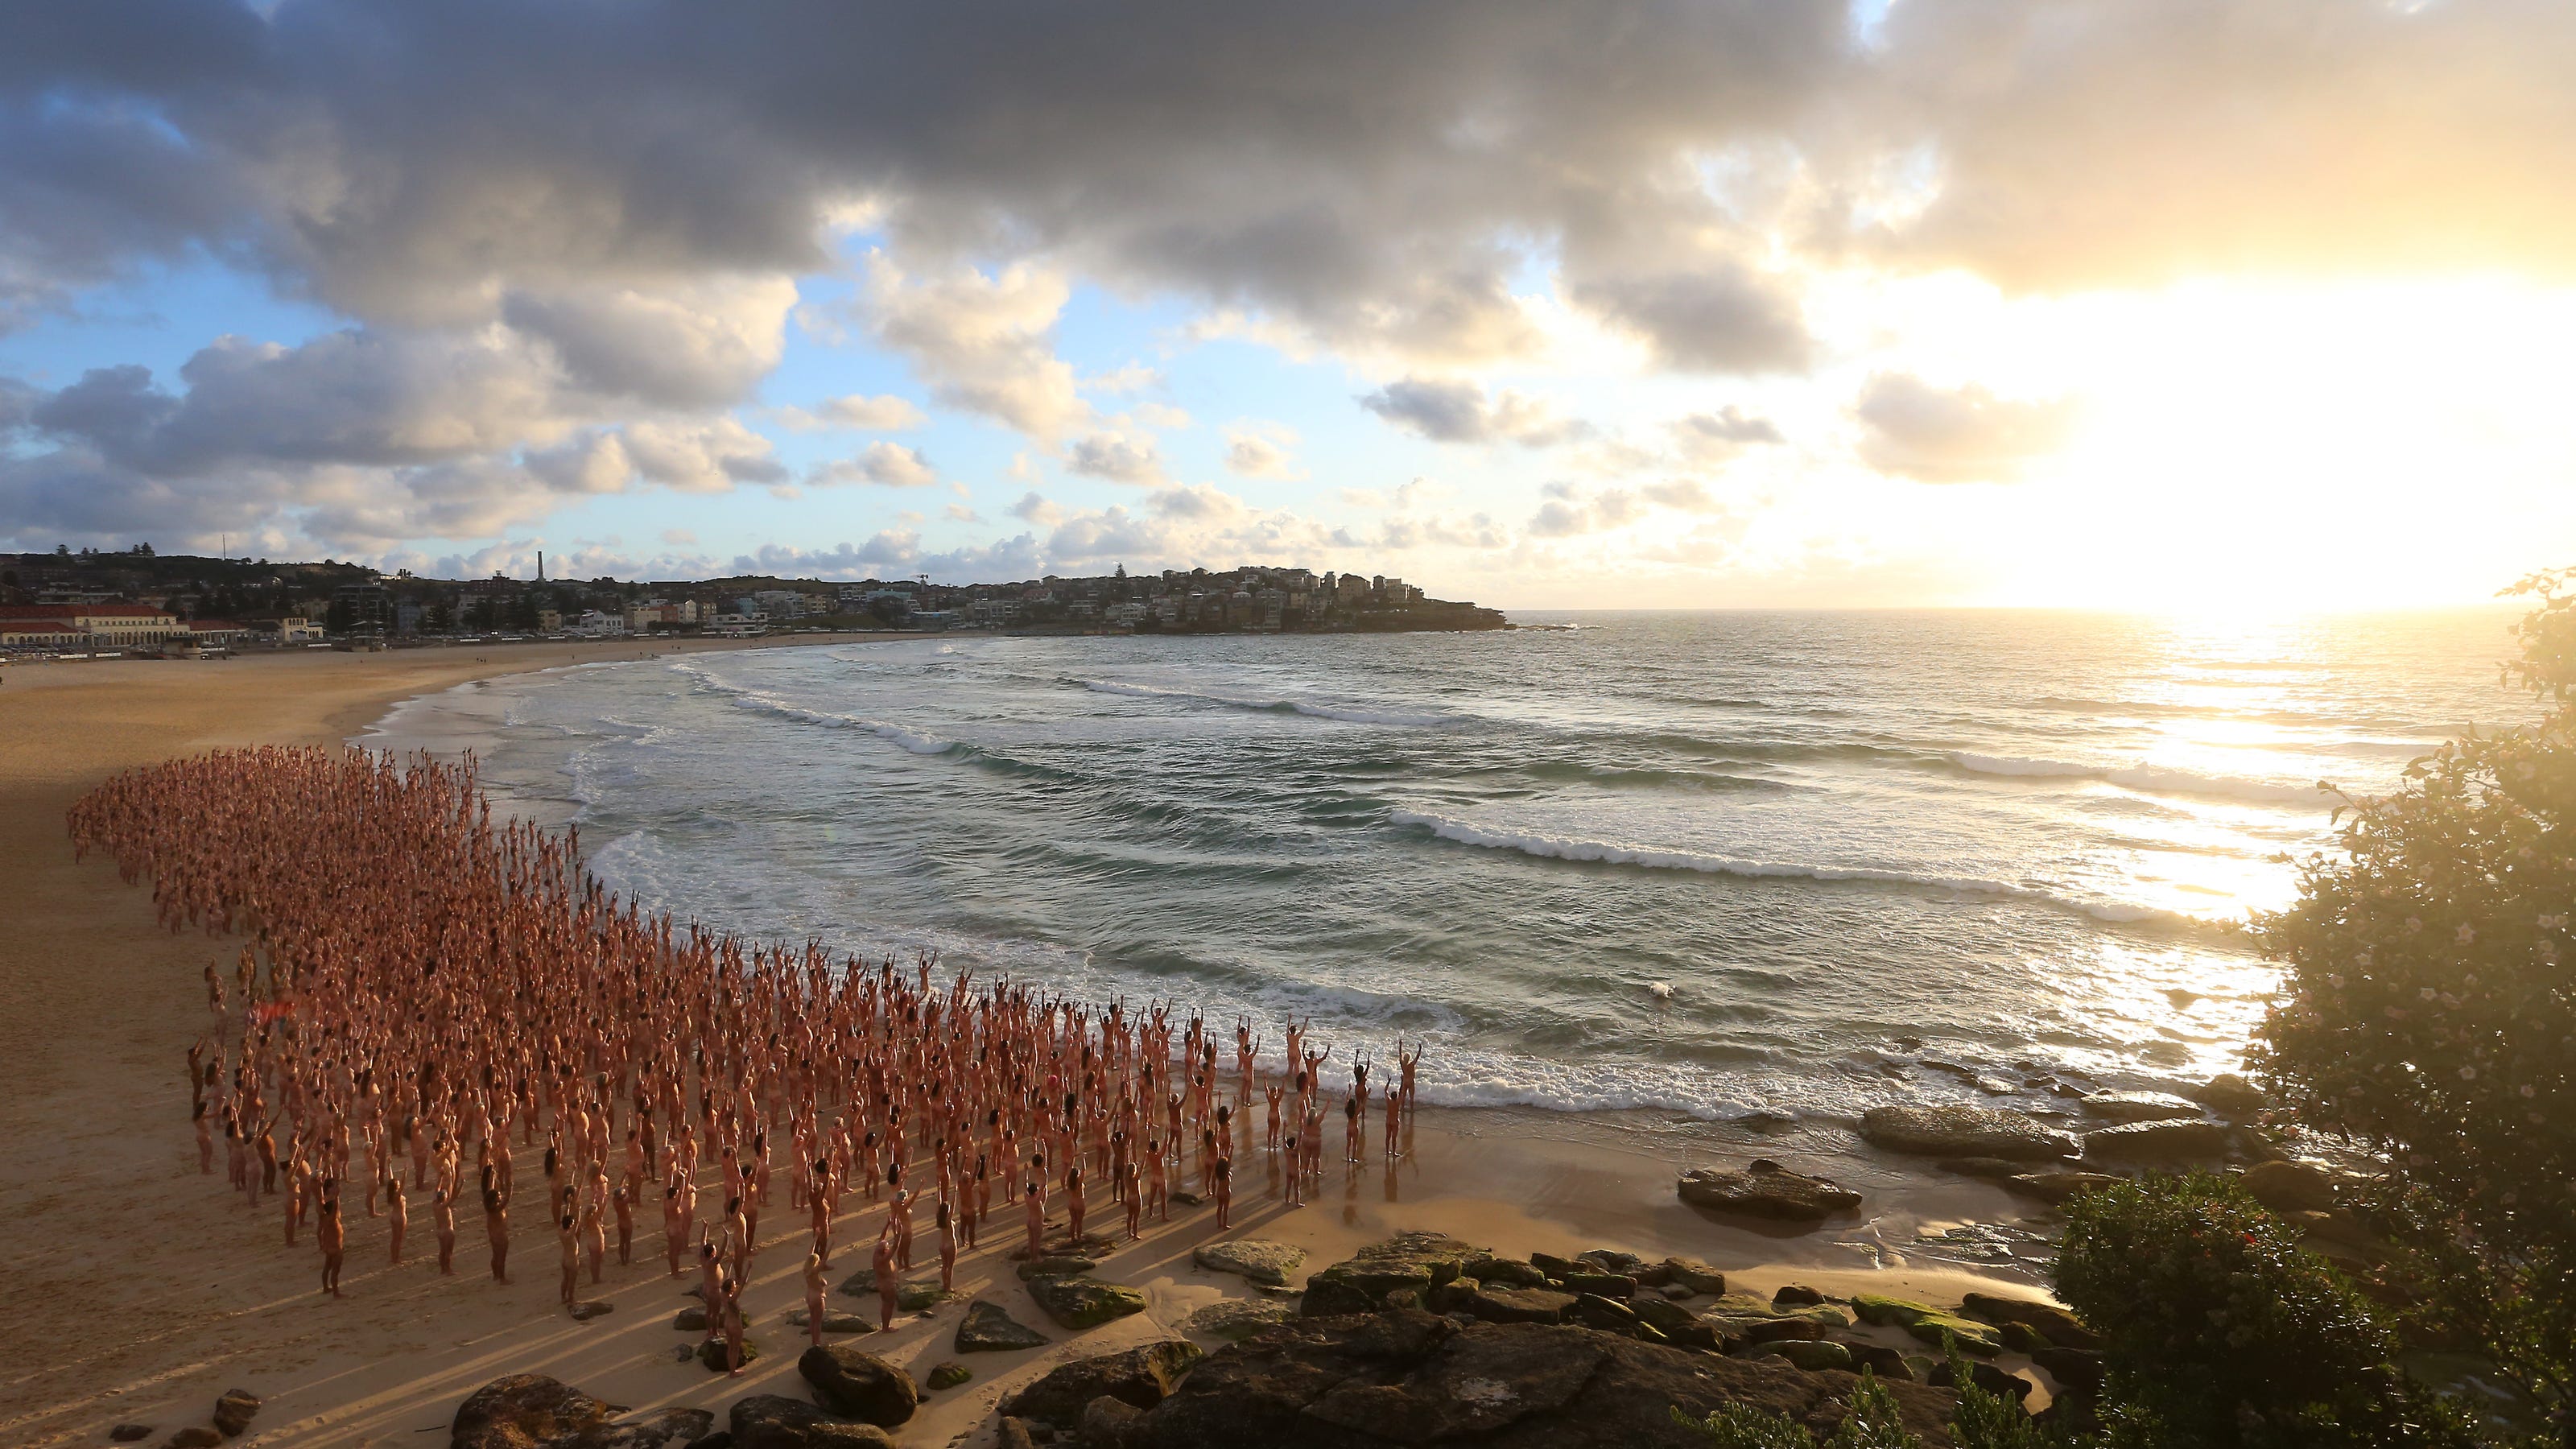 Thousands pose nude at Australian beach in Spencer Tunick photo shoot